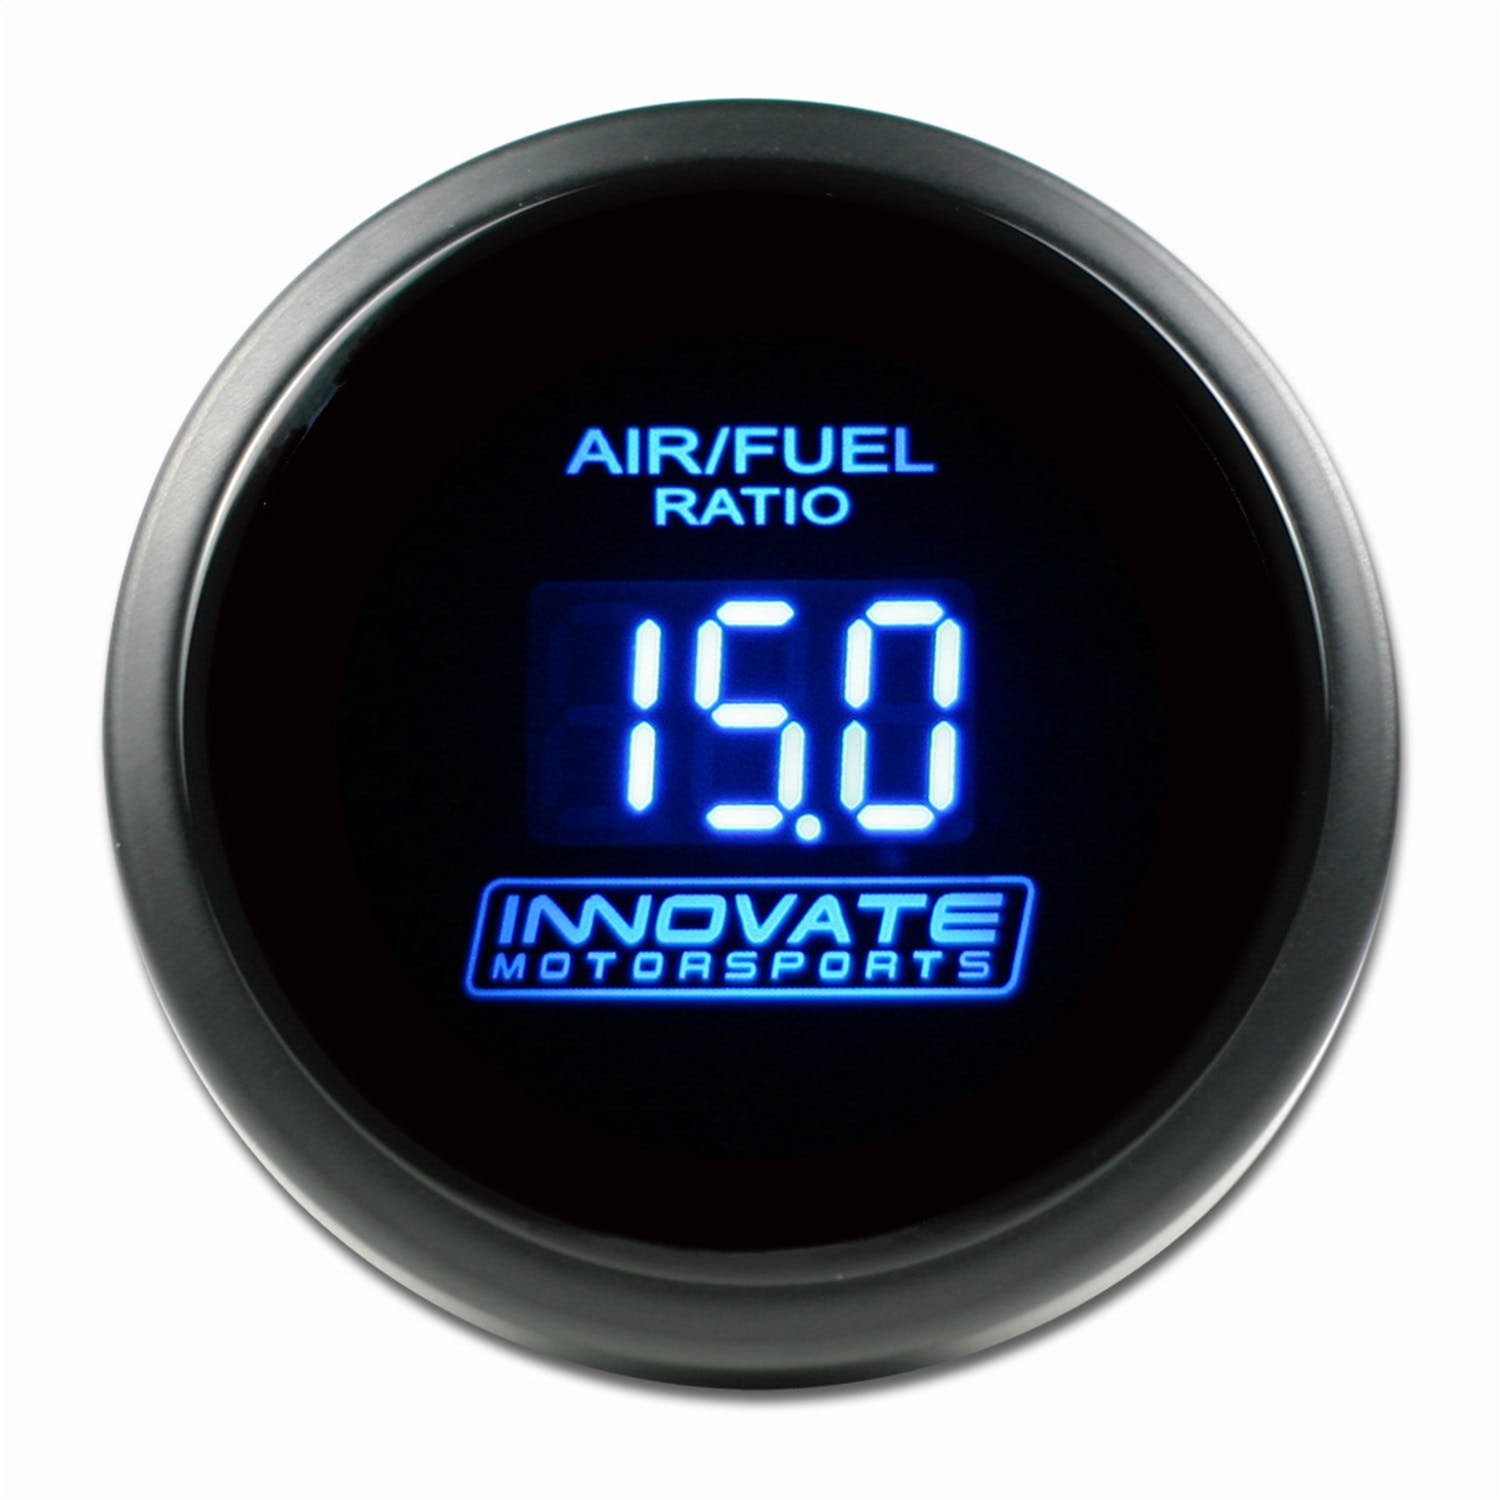 Innovate Motorsports 3793 DB Digital Air/Fuel Gauge (Blue) for LC-1, LC-2, LM-1, or LM-2 products